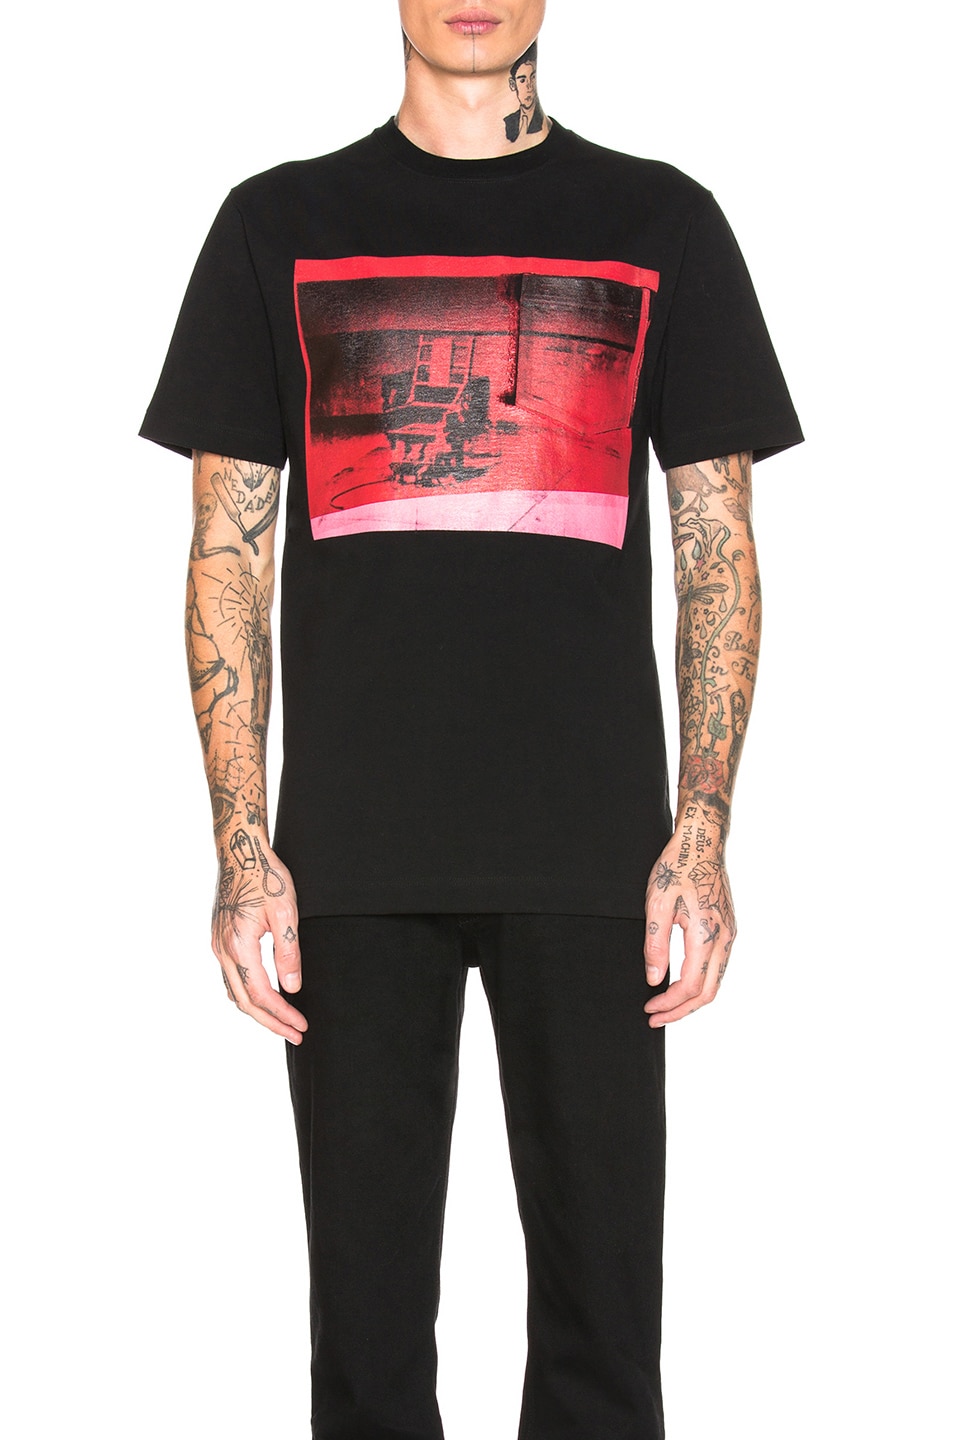 Image 1 of CALVIN KLEIN 205W39NYC Electric Chair Tee in Black & American Beauty & Rapture Rose